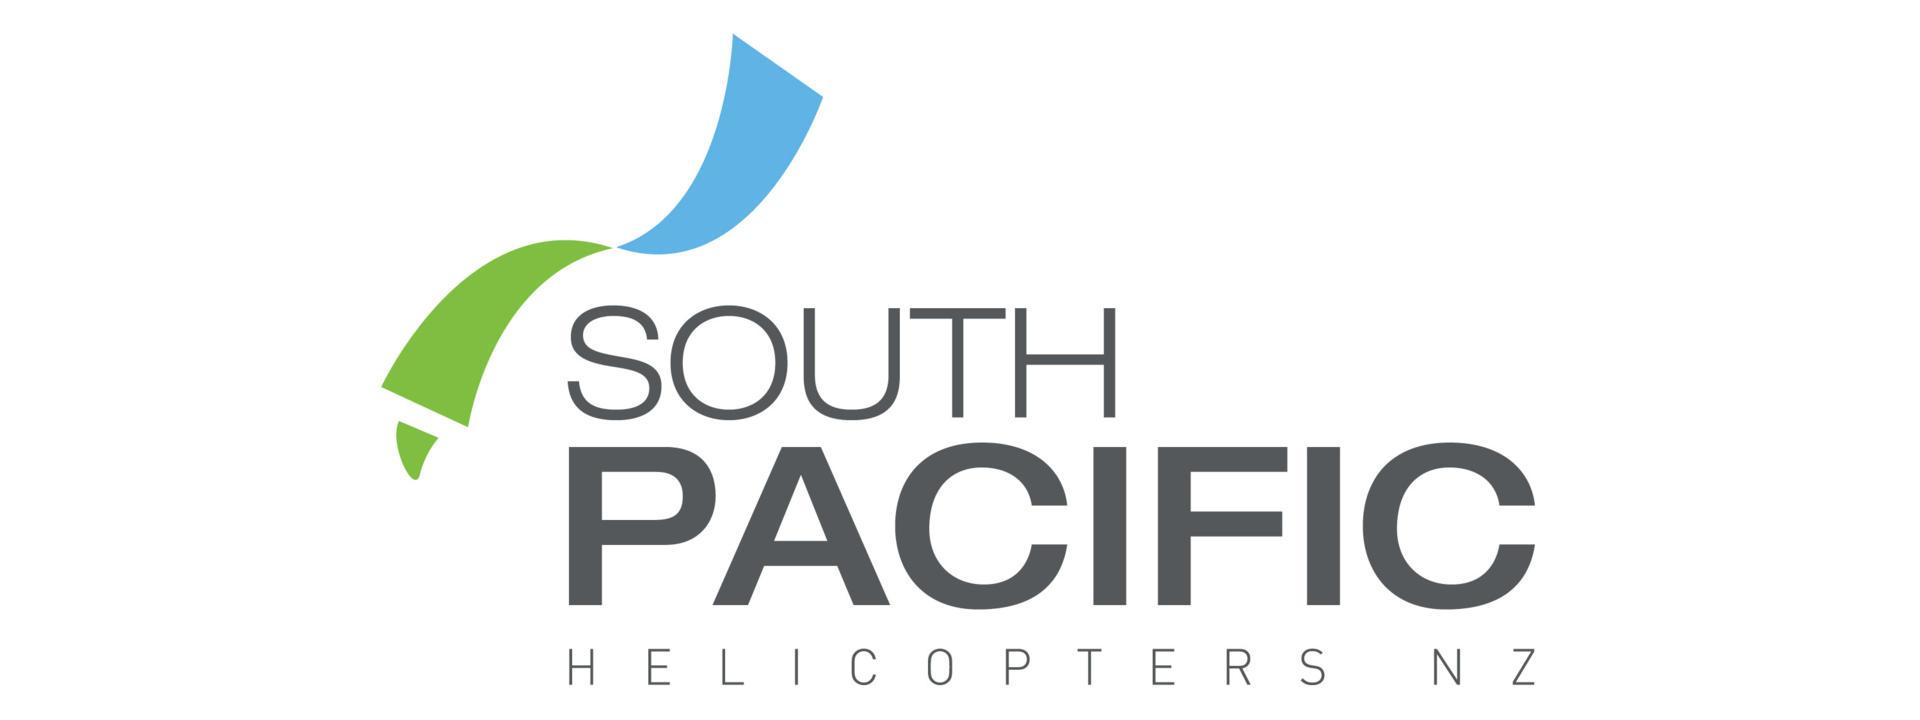 southpacifichelicopters_logo_rgb_full_hires.jpg